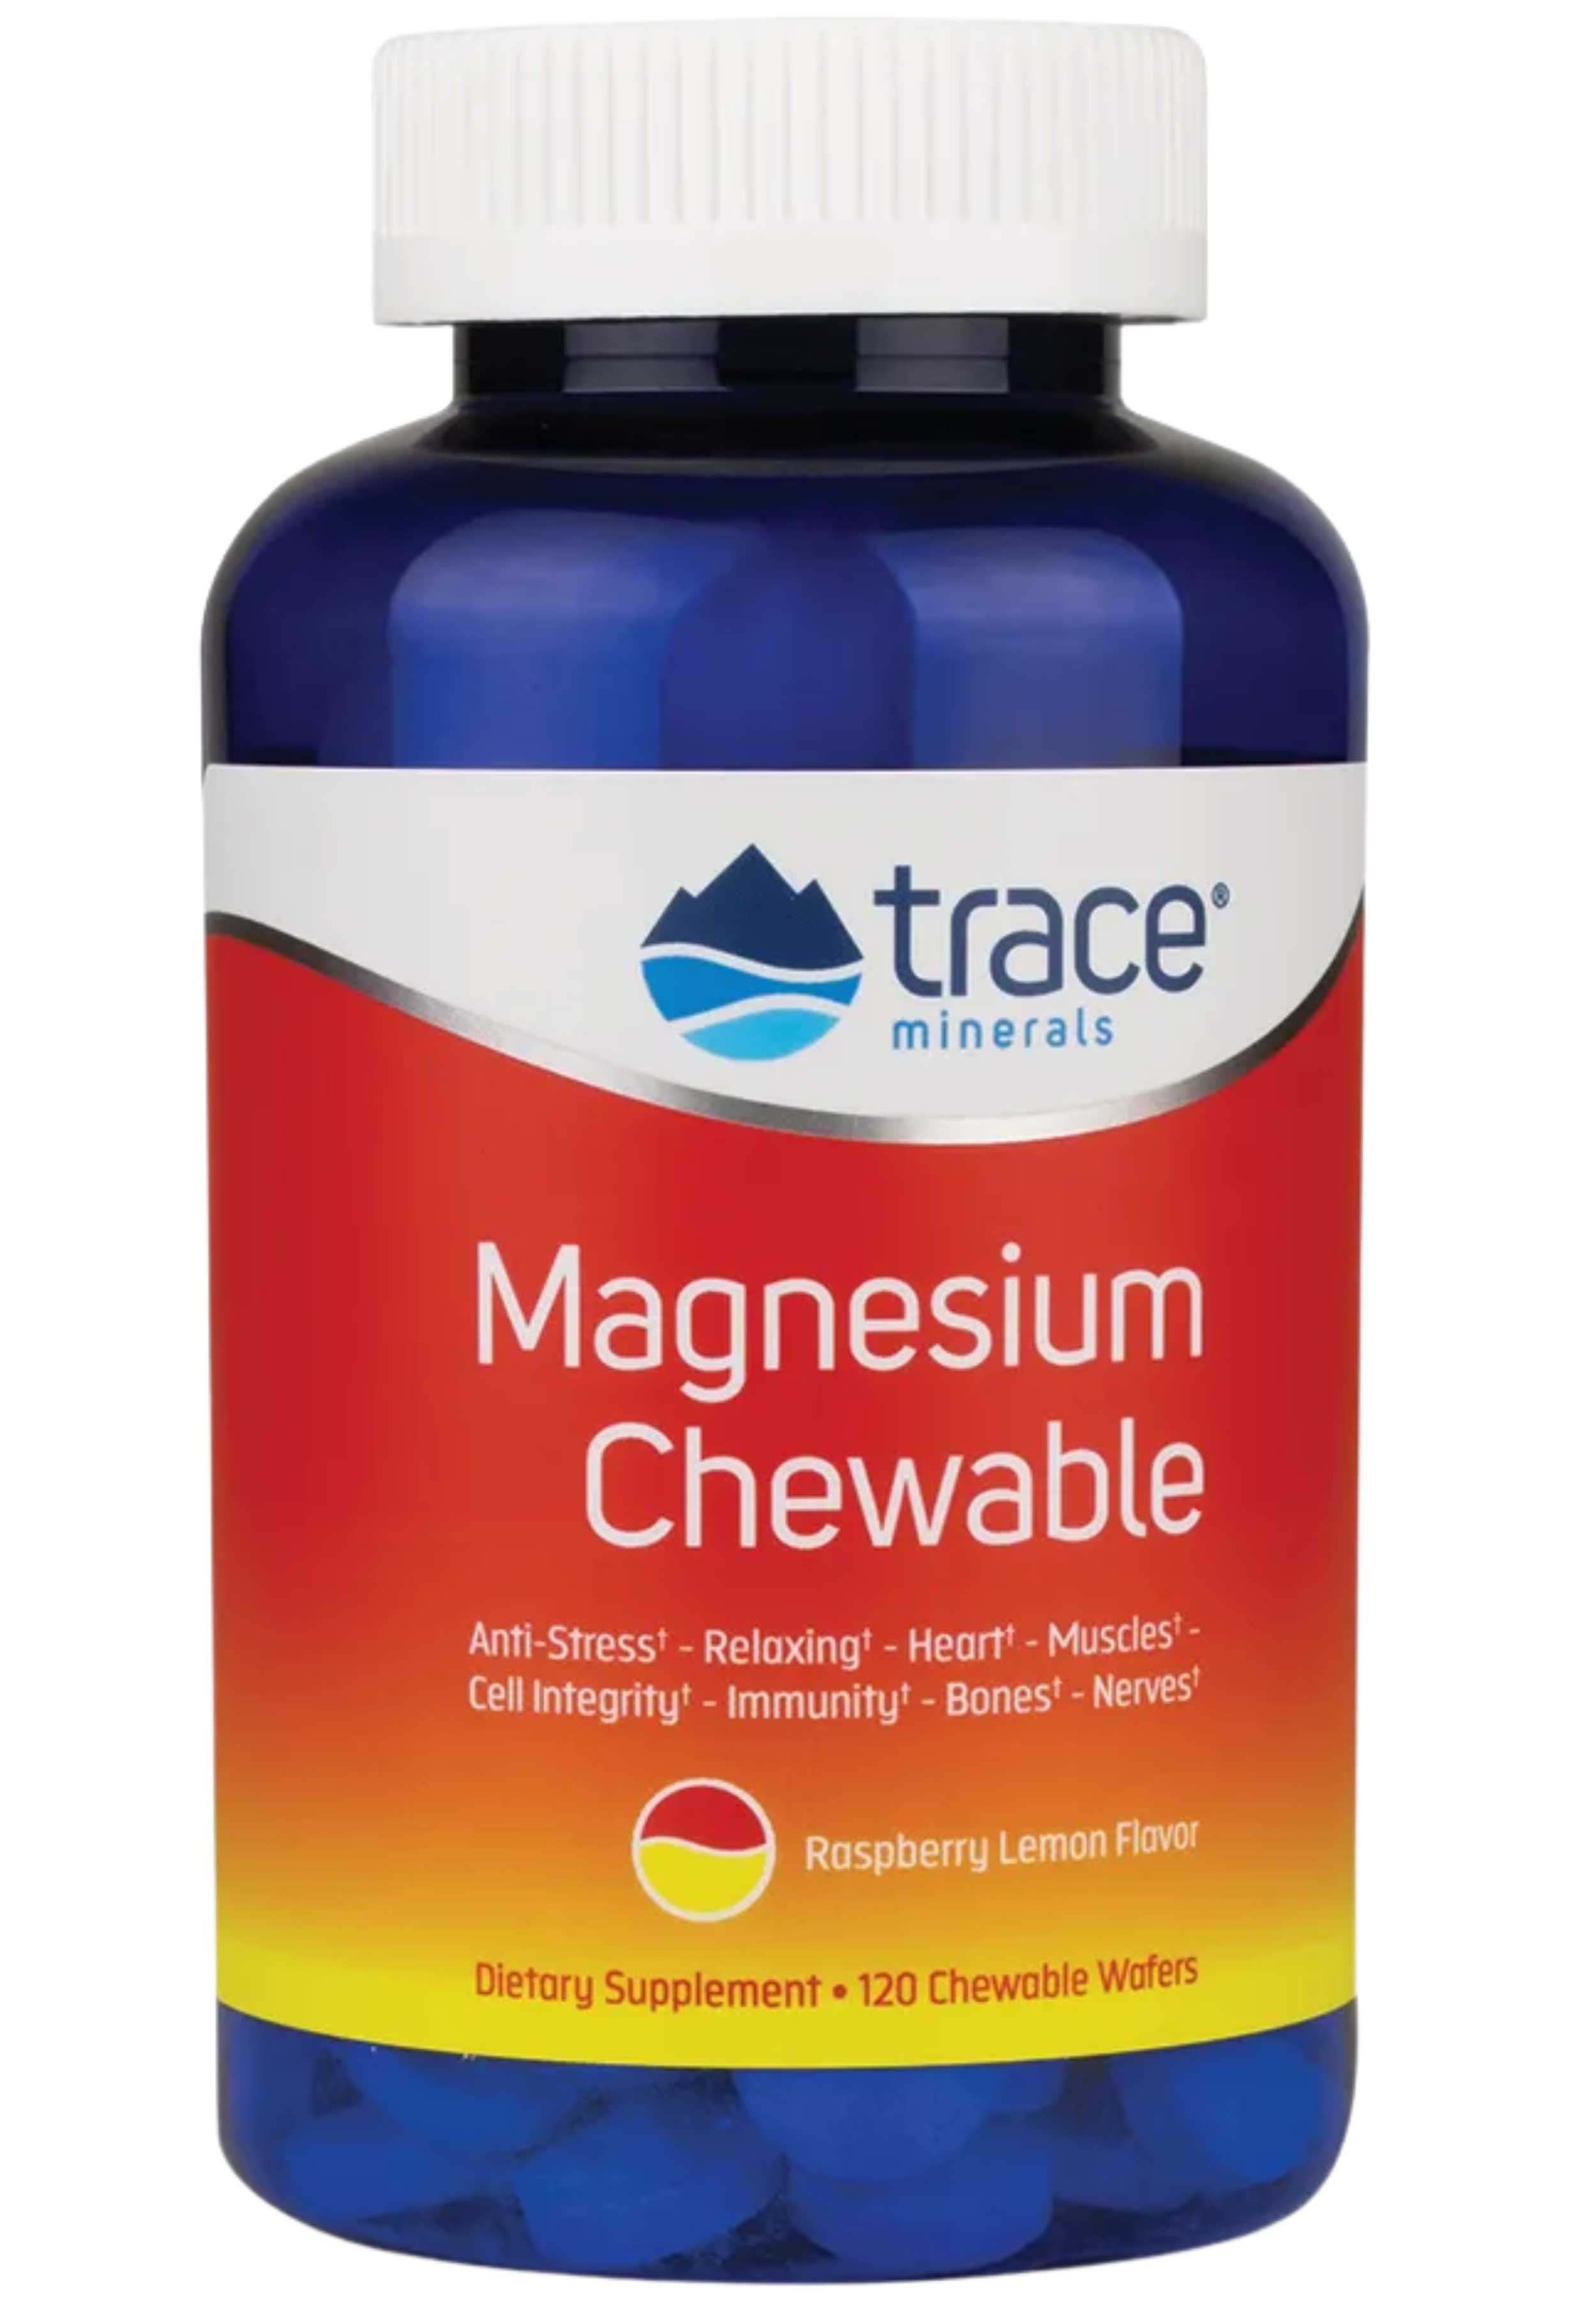 Trace Minerals Research Magnesium Chewable